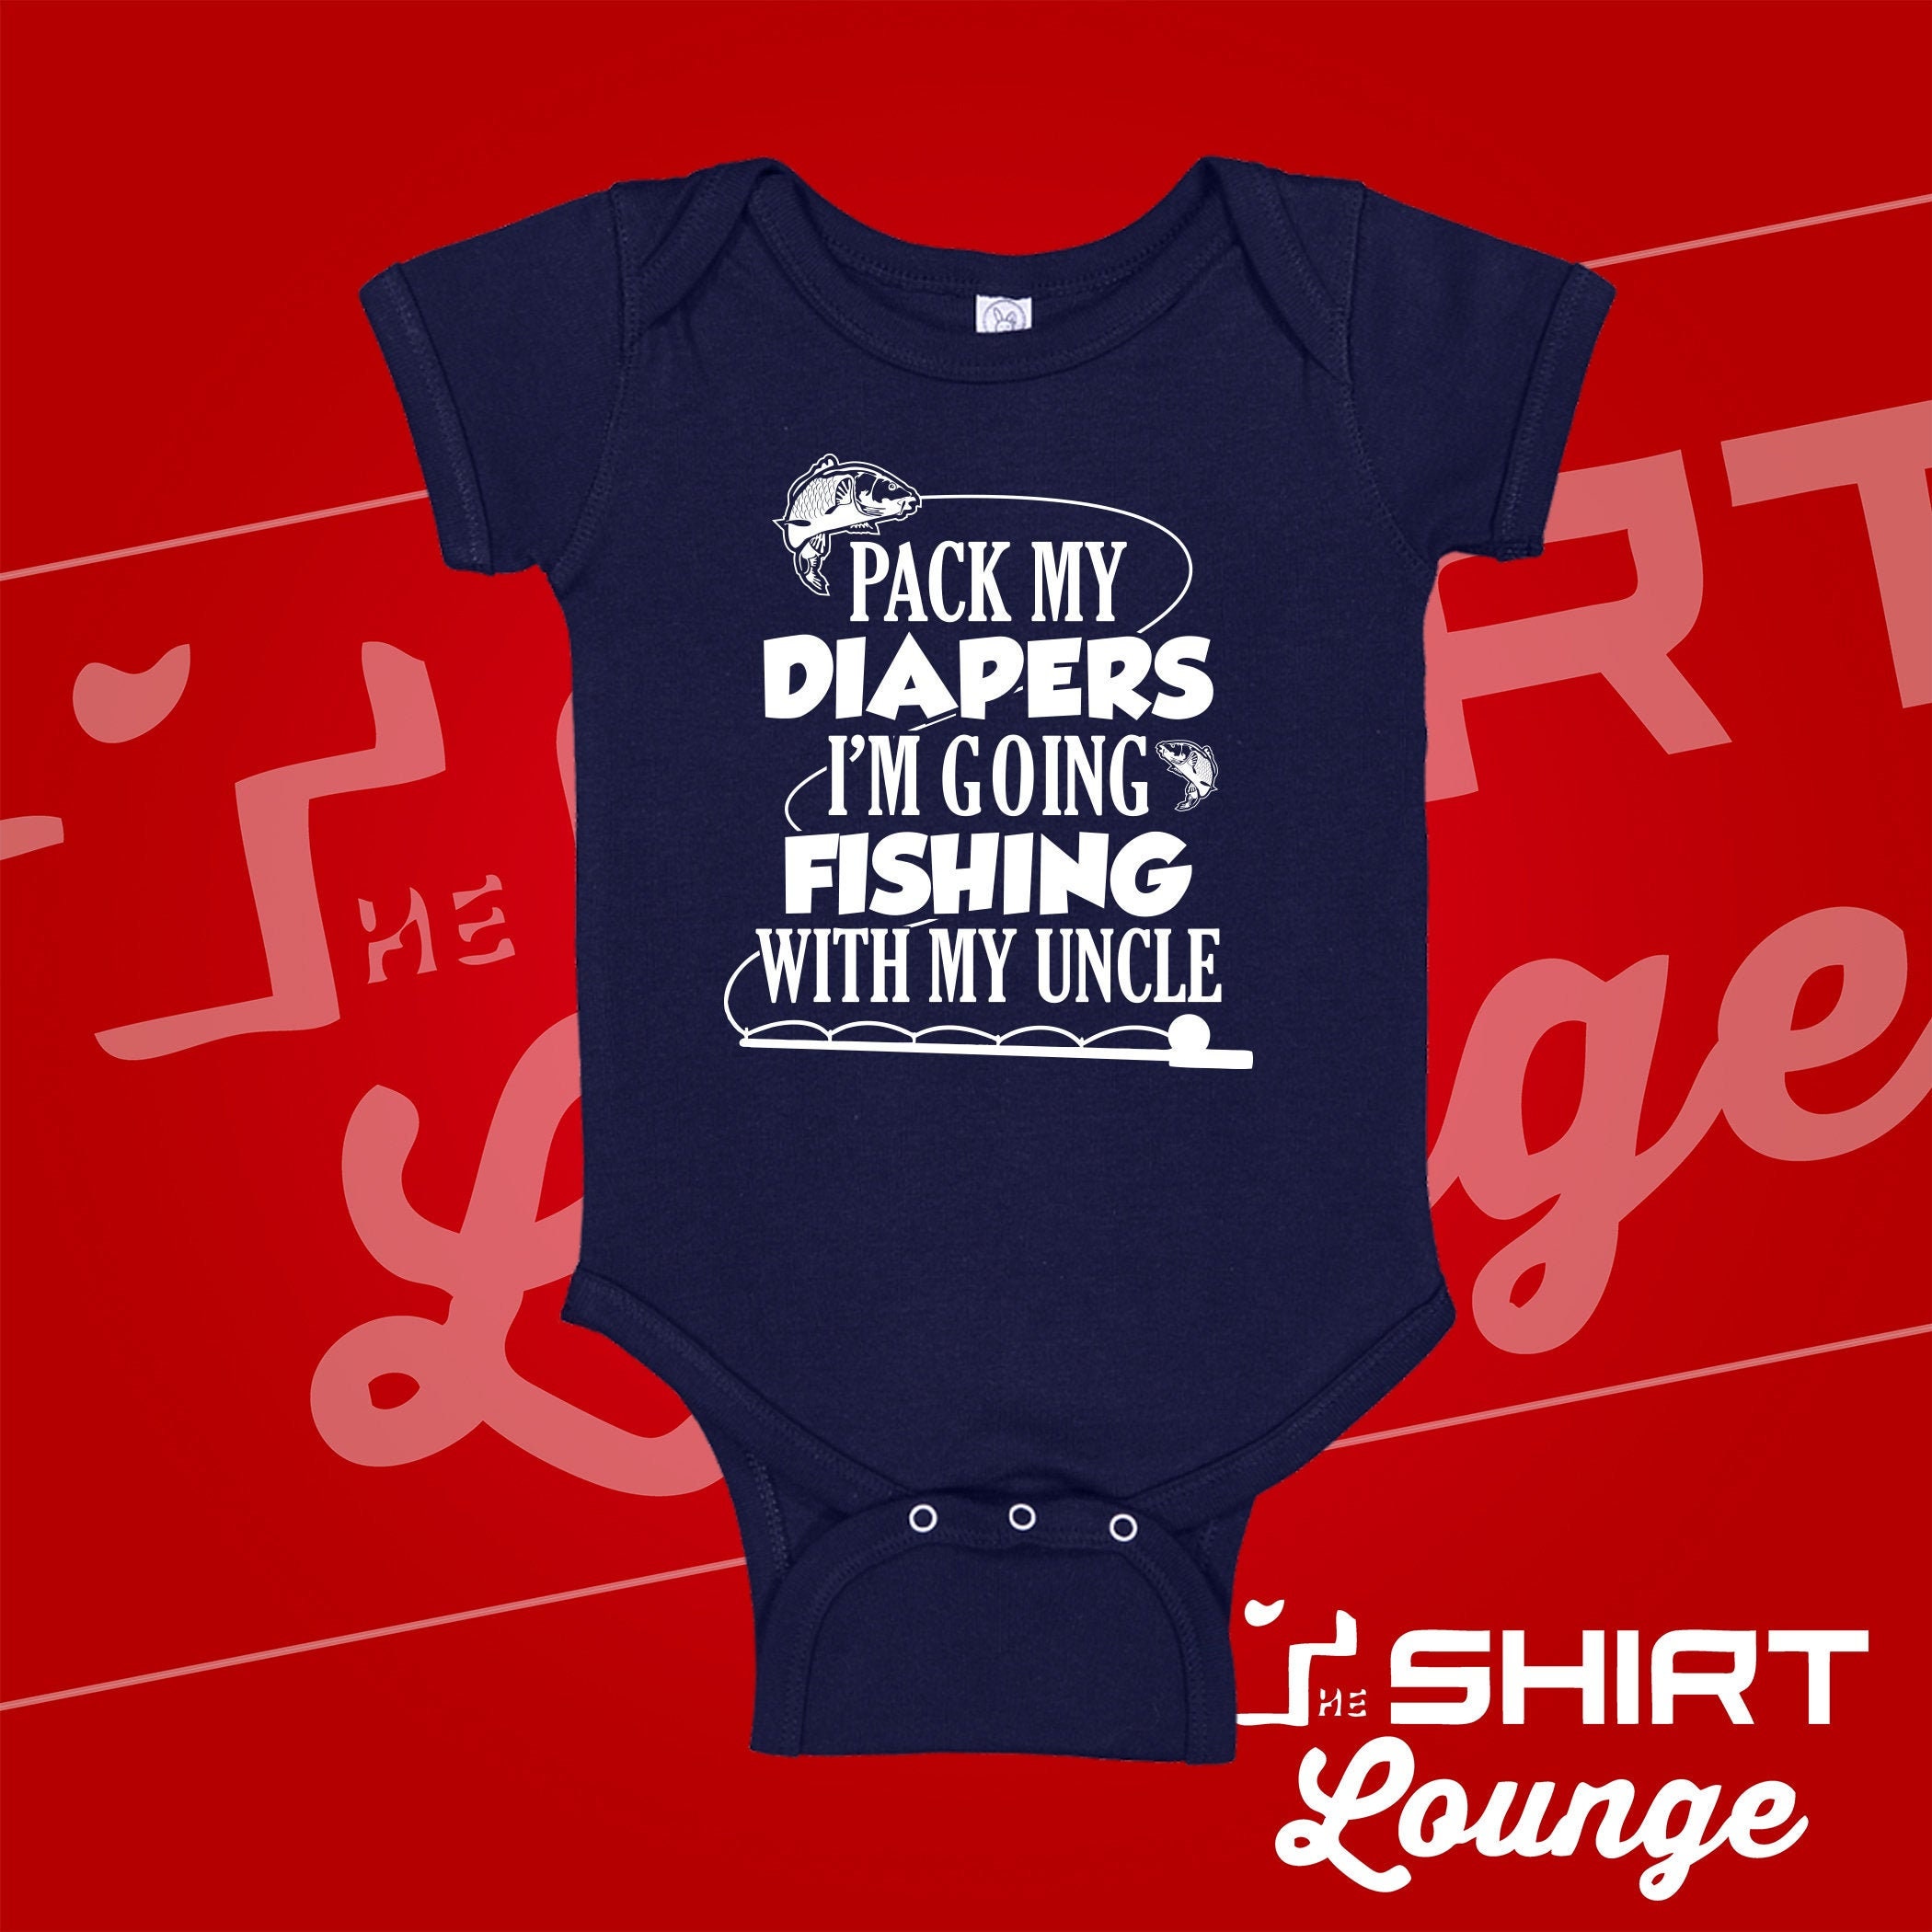 Pack My Diapers I'm Going Fishing With My Uncle Baby Bodysuit One Piece  Toddler T-shirt Infant Clothing Uncle Baby Gift Fishing Buddy 